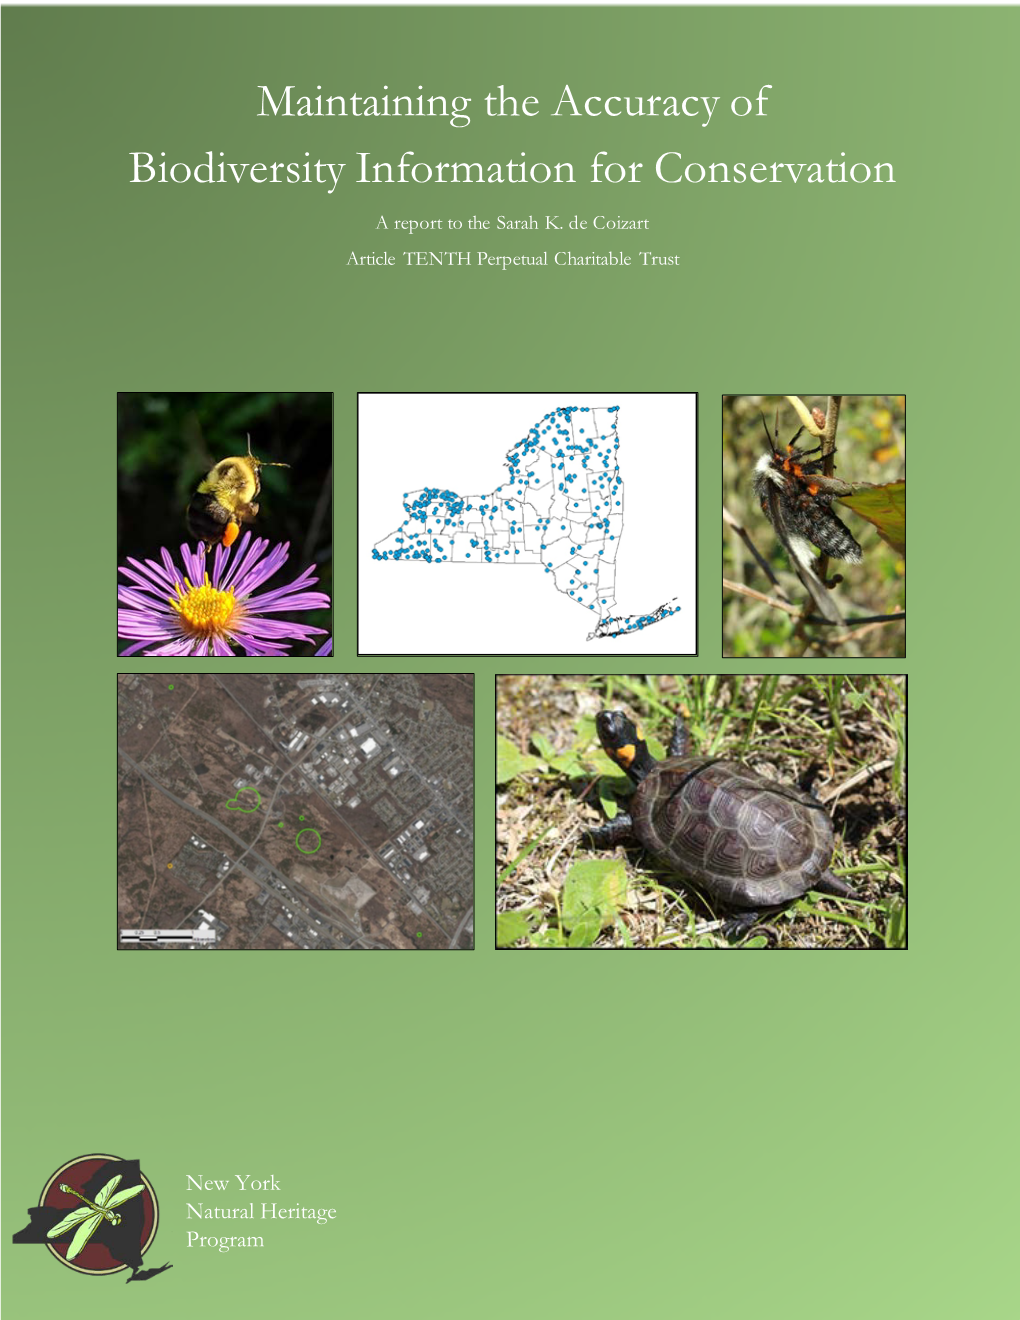 Maintaining the Accuracy of Biodiversity Information for Conservation a Report to the Sarah K